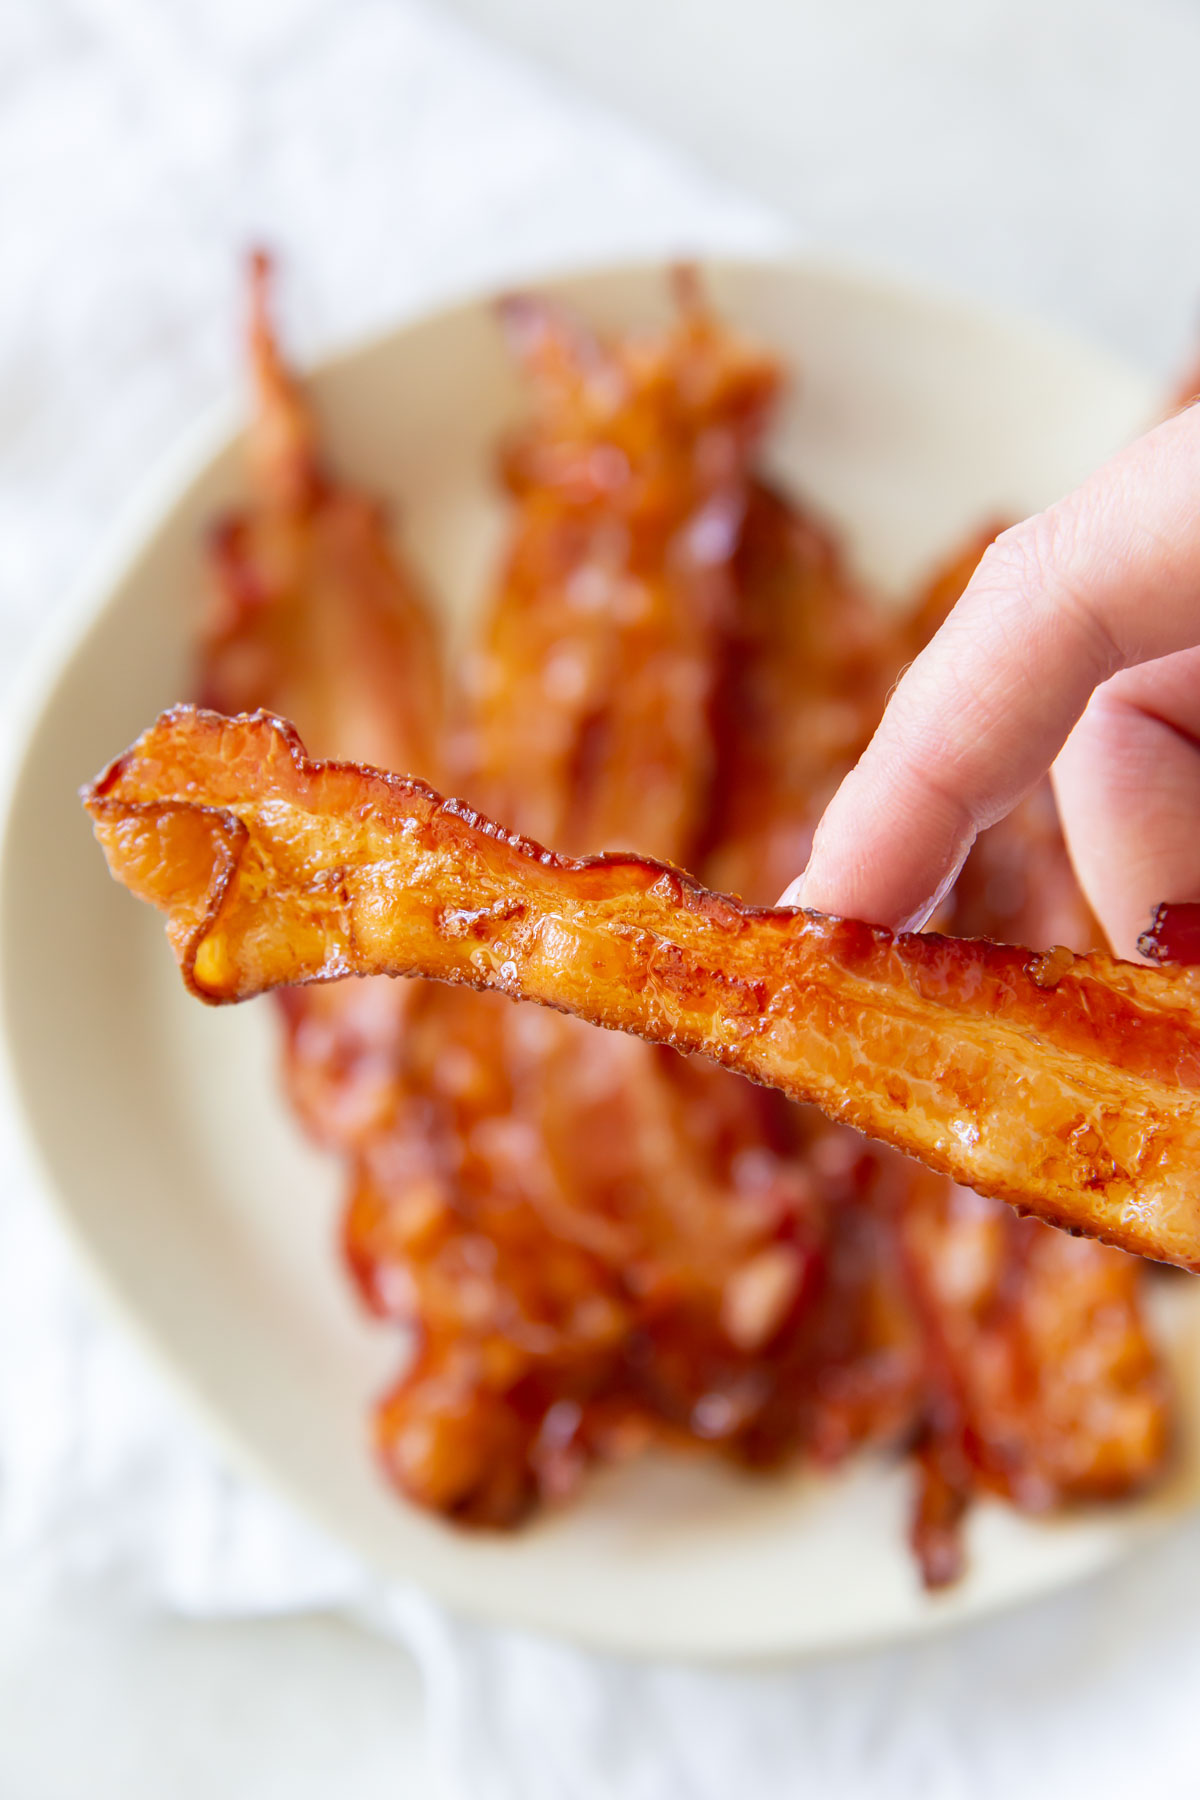 hand holding a slice of bacon over a plate of bacon